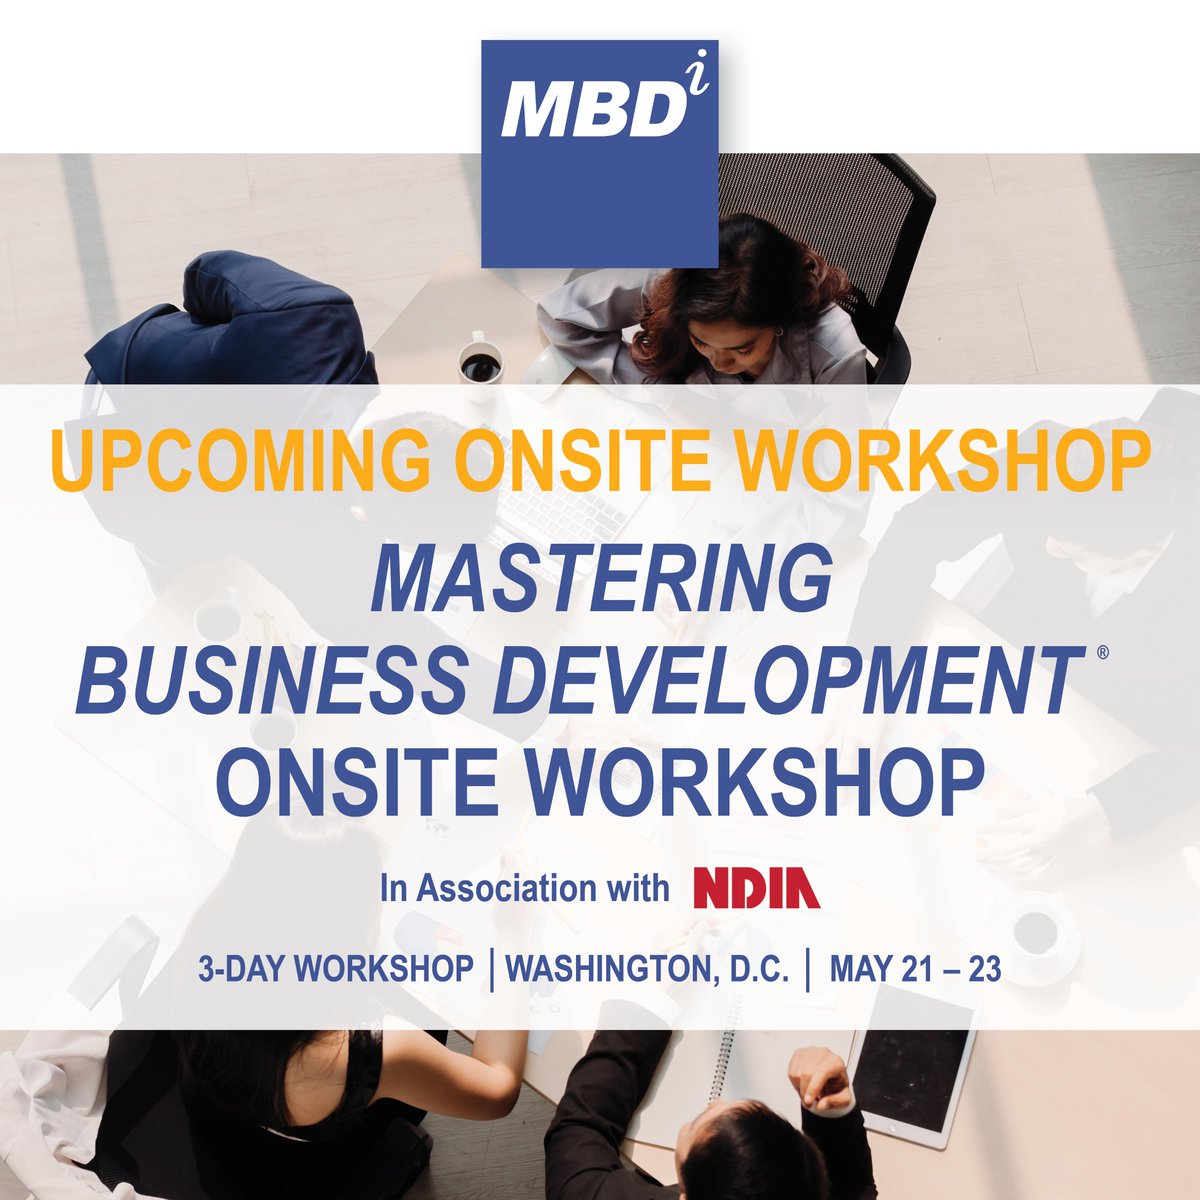 Did you know the secret to mastering cold calls isn't about the script? Mastering Business Development equips you with the tools and techniques to turn cold calls into QUALIFIED leads.

Register here ➡️ mbdi.com
#MBDi #BusinessDevelopment #SalesTips